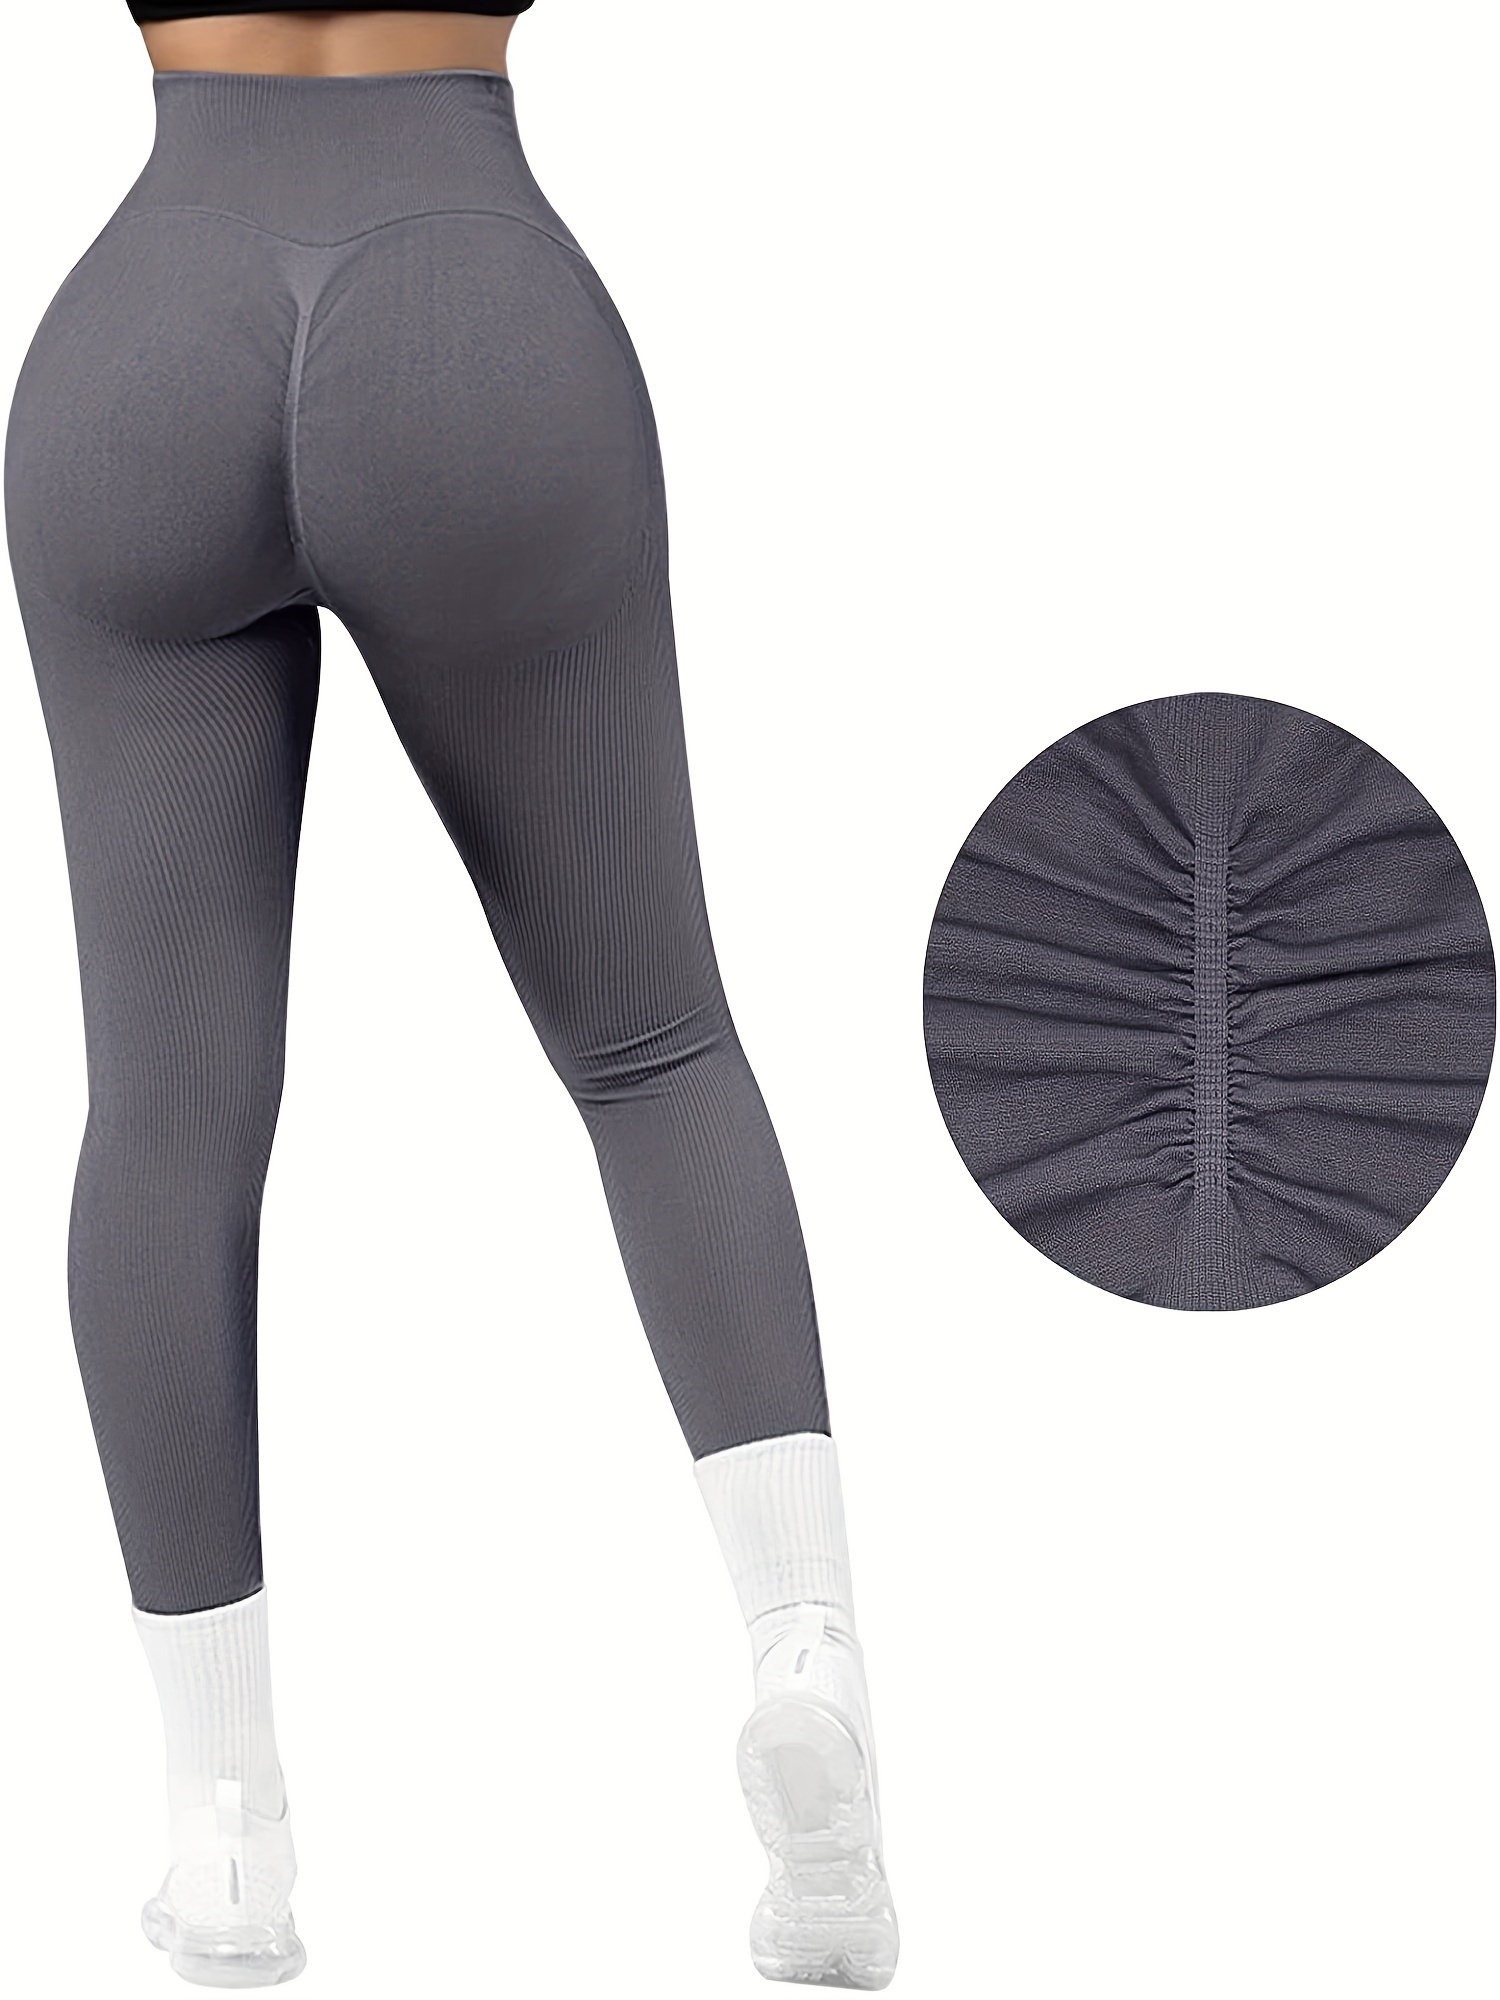 TOWED22 Women's Workout Leggings - High Waisted Yoga Pants with Side  Pockets Athletic Running Tights(Grey,M) 